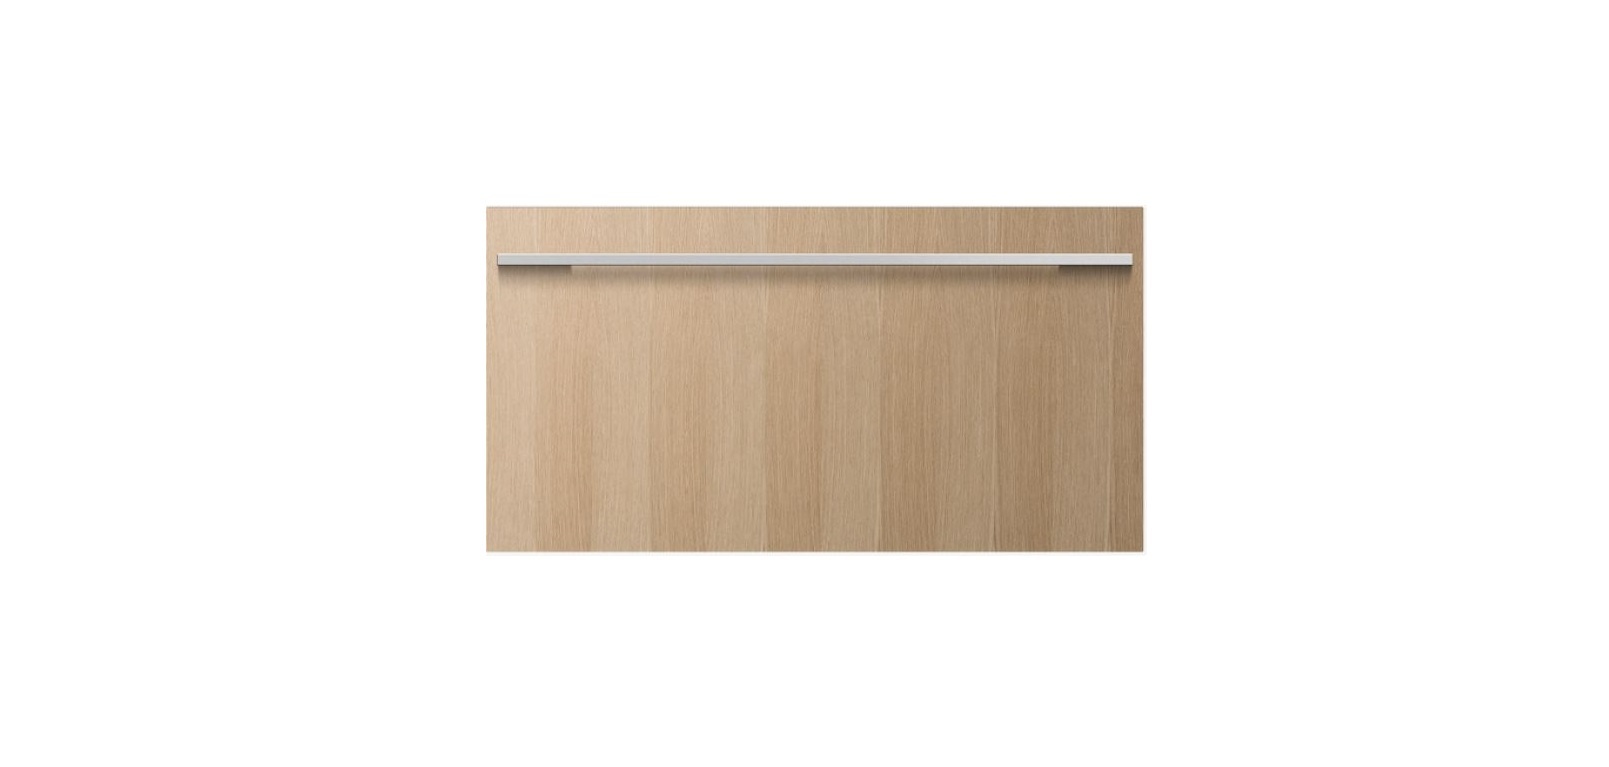 RB90S64MKIW1 Integrated CoolDrawer Multite-tmperature Drawer